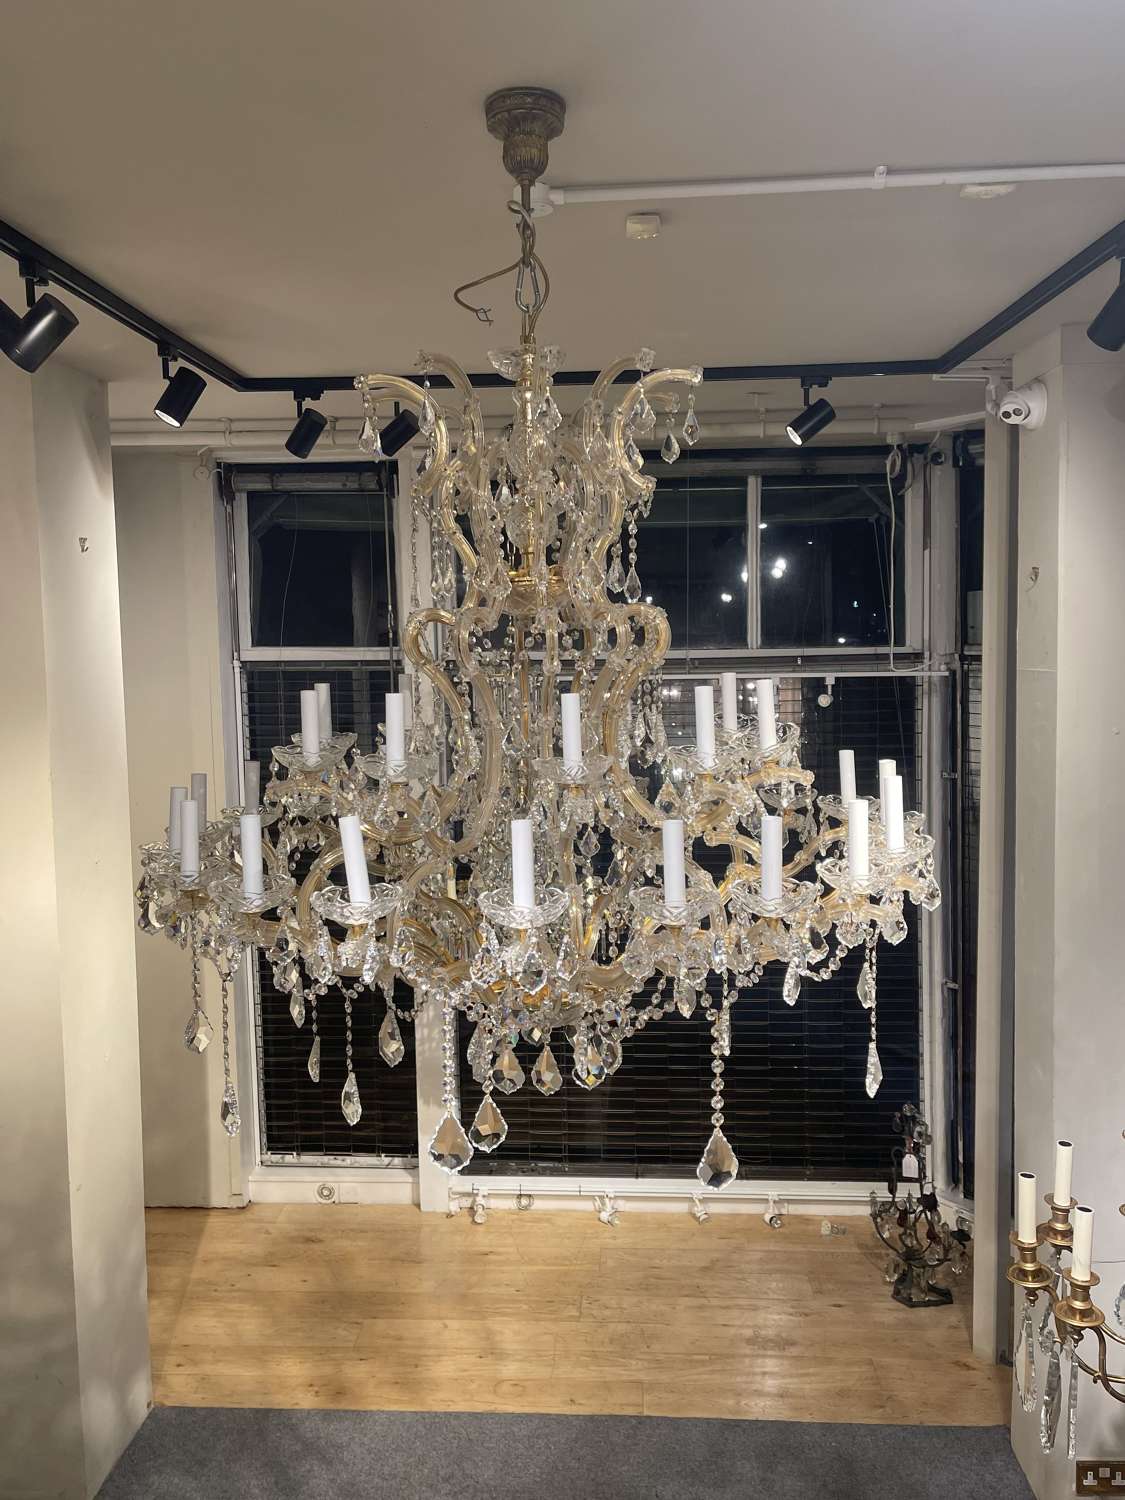 A superb gilded Mary Theresa chandelier